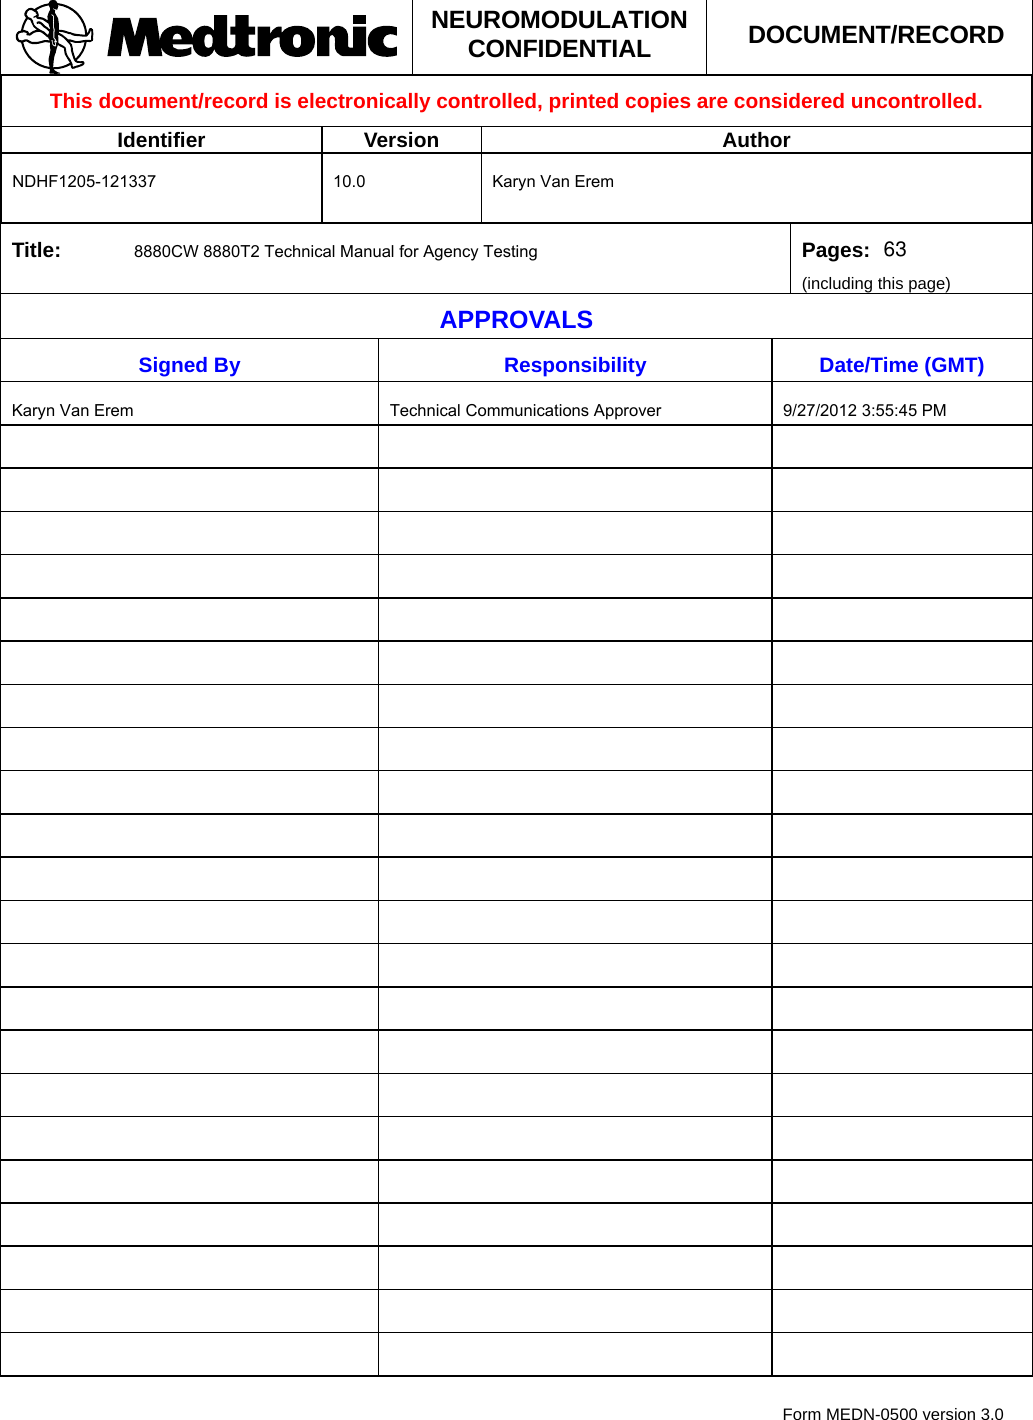  Form MEDN-0500 version 3.0  NEUROMODULATION CONFIDENTIAL  DOCUMENT/RECORD This document/record is electronically controlled, printed copies are considered uncontrolled. Identifier Version  Author           Title:                                 Pages: (including this page)  APPROVALS Signed By Responsibility Date/Time (GMT)                                                                                                                                 NDHF1205-121337 10.0 Karyn Van Erem8880CW 8880T2 Technical Manual for Agency TestingKaryn Van Erem Technical Communications Approver 9/27/2012 3:55:45 PM63